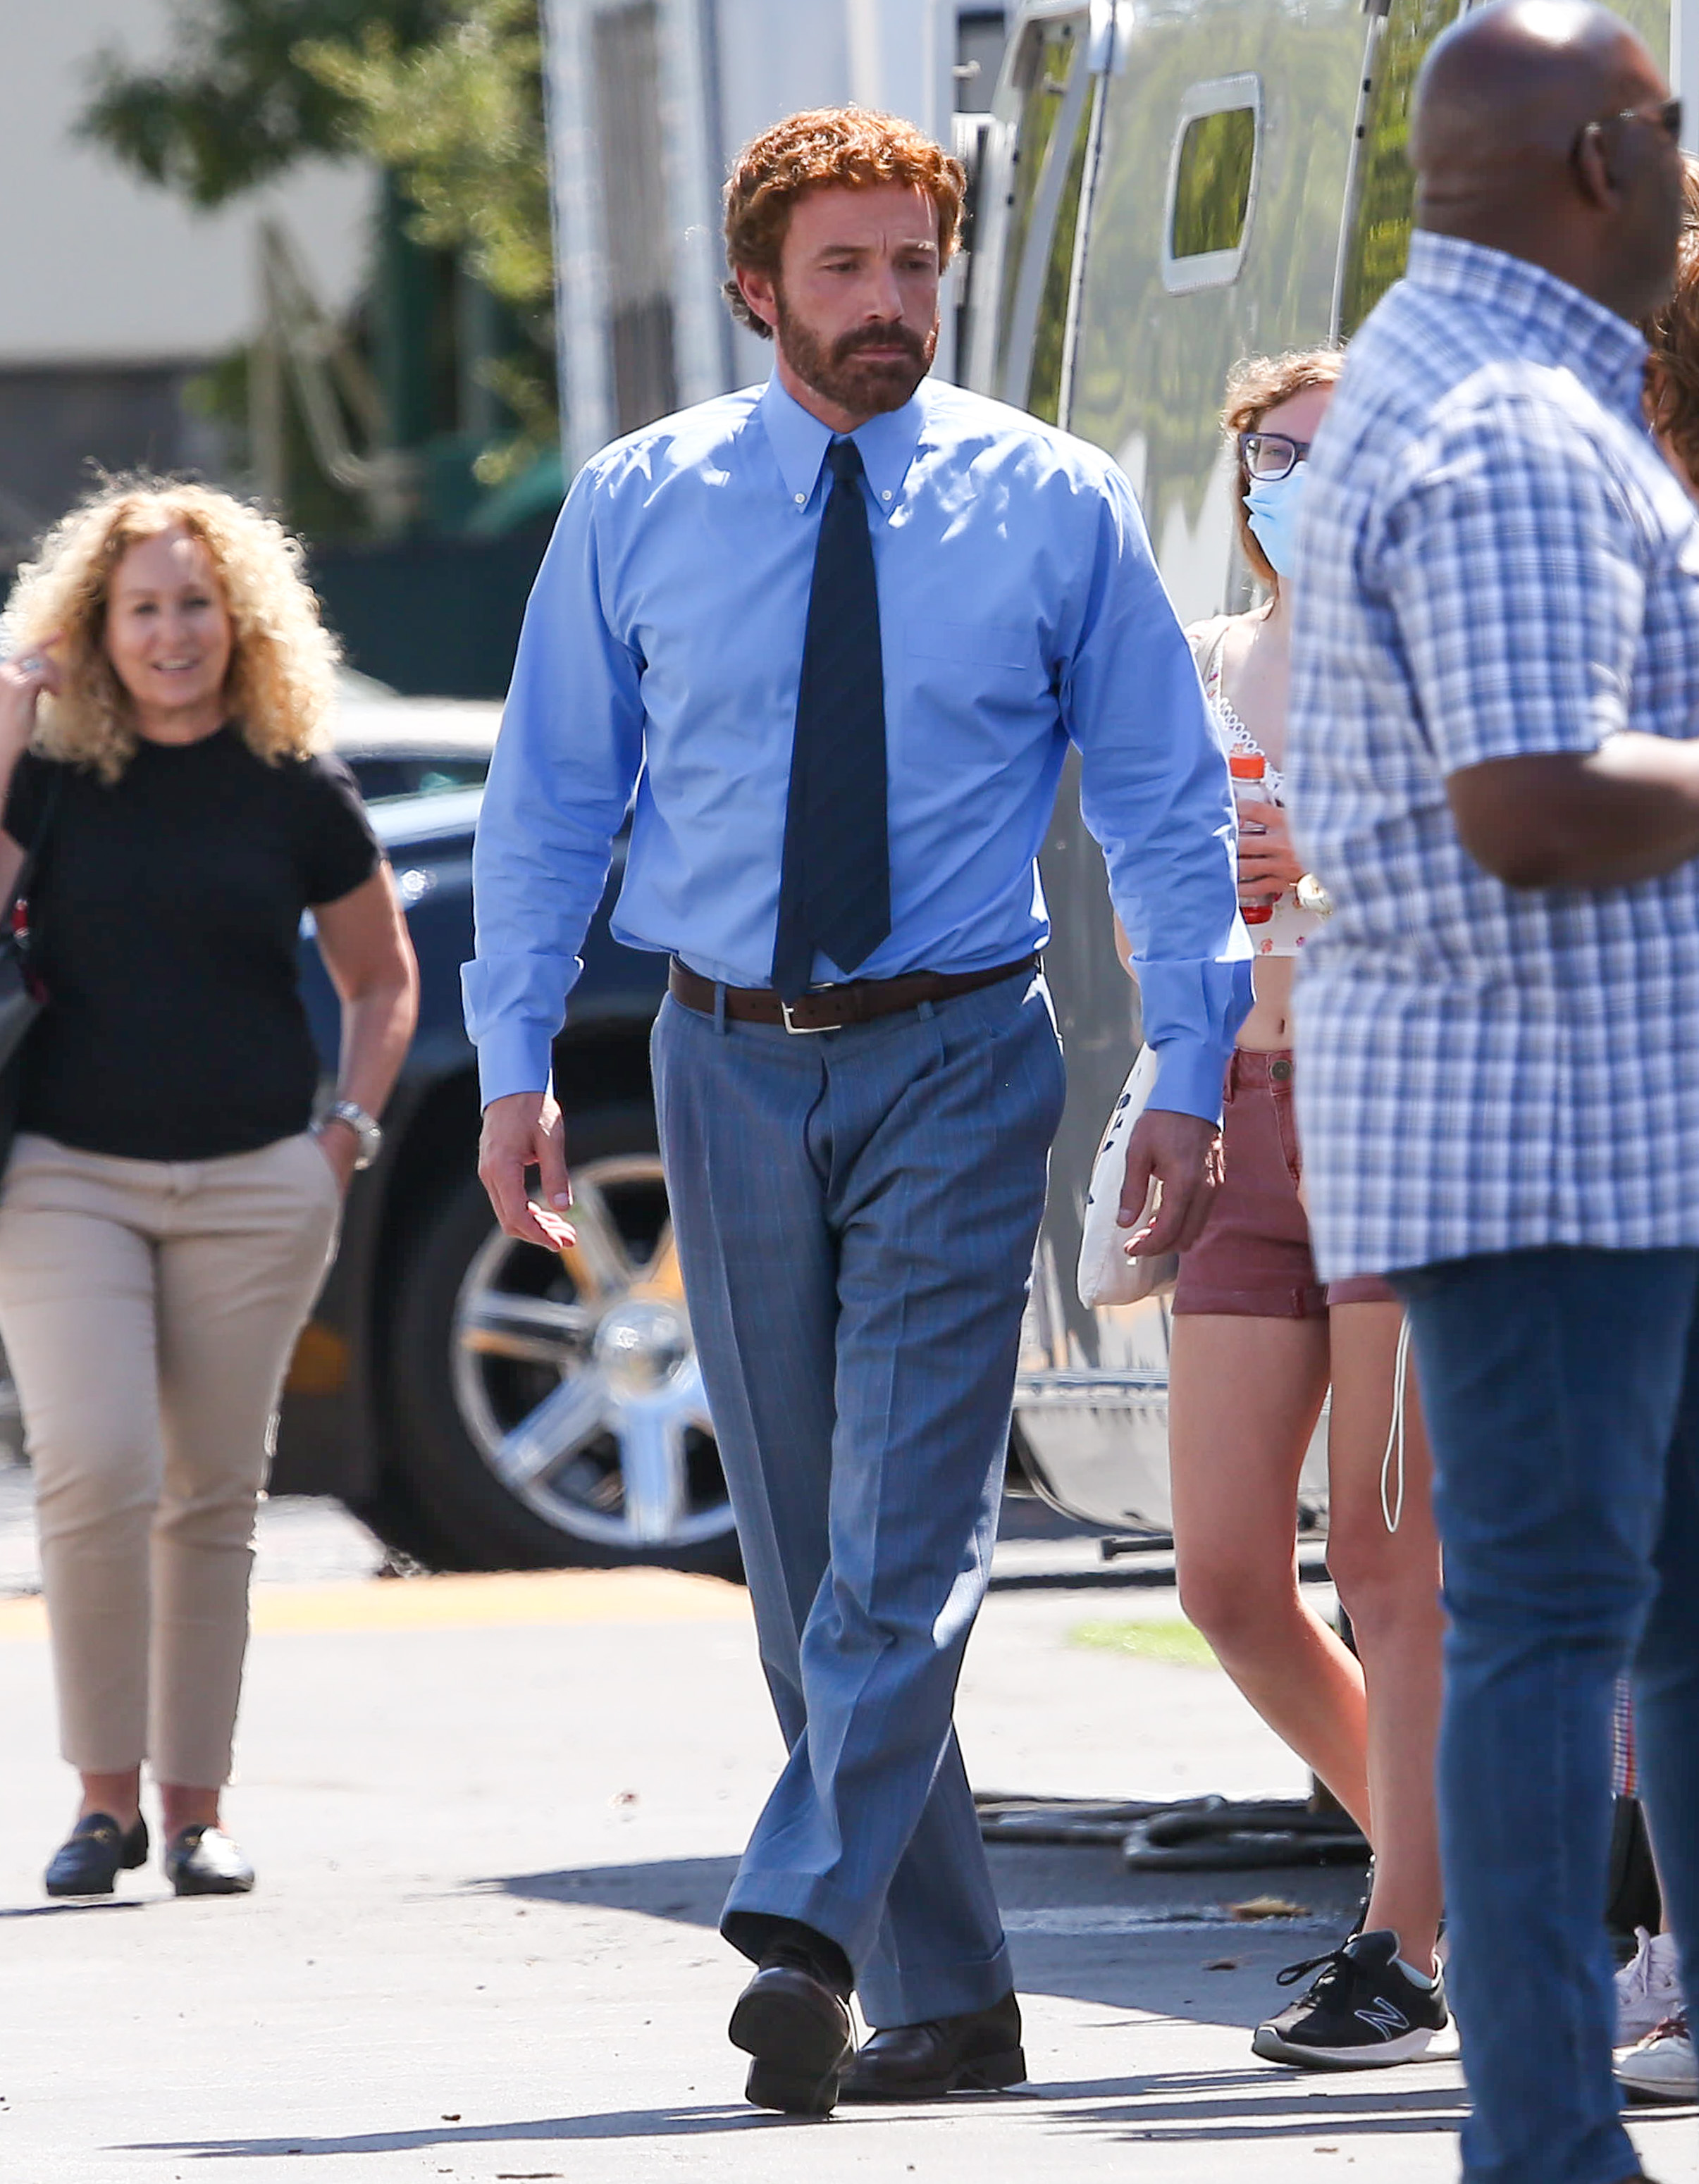 Ben Affleck spotted on the set of "Air" in Los Angeles, California on July 5, 2022 | Source: Getty Images